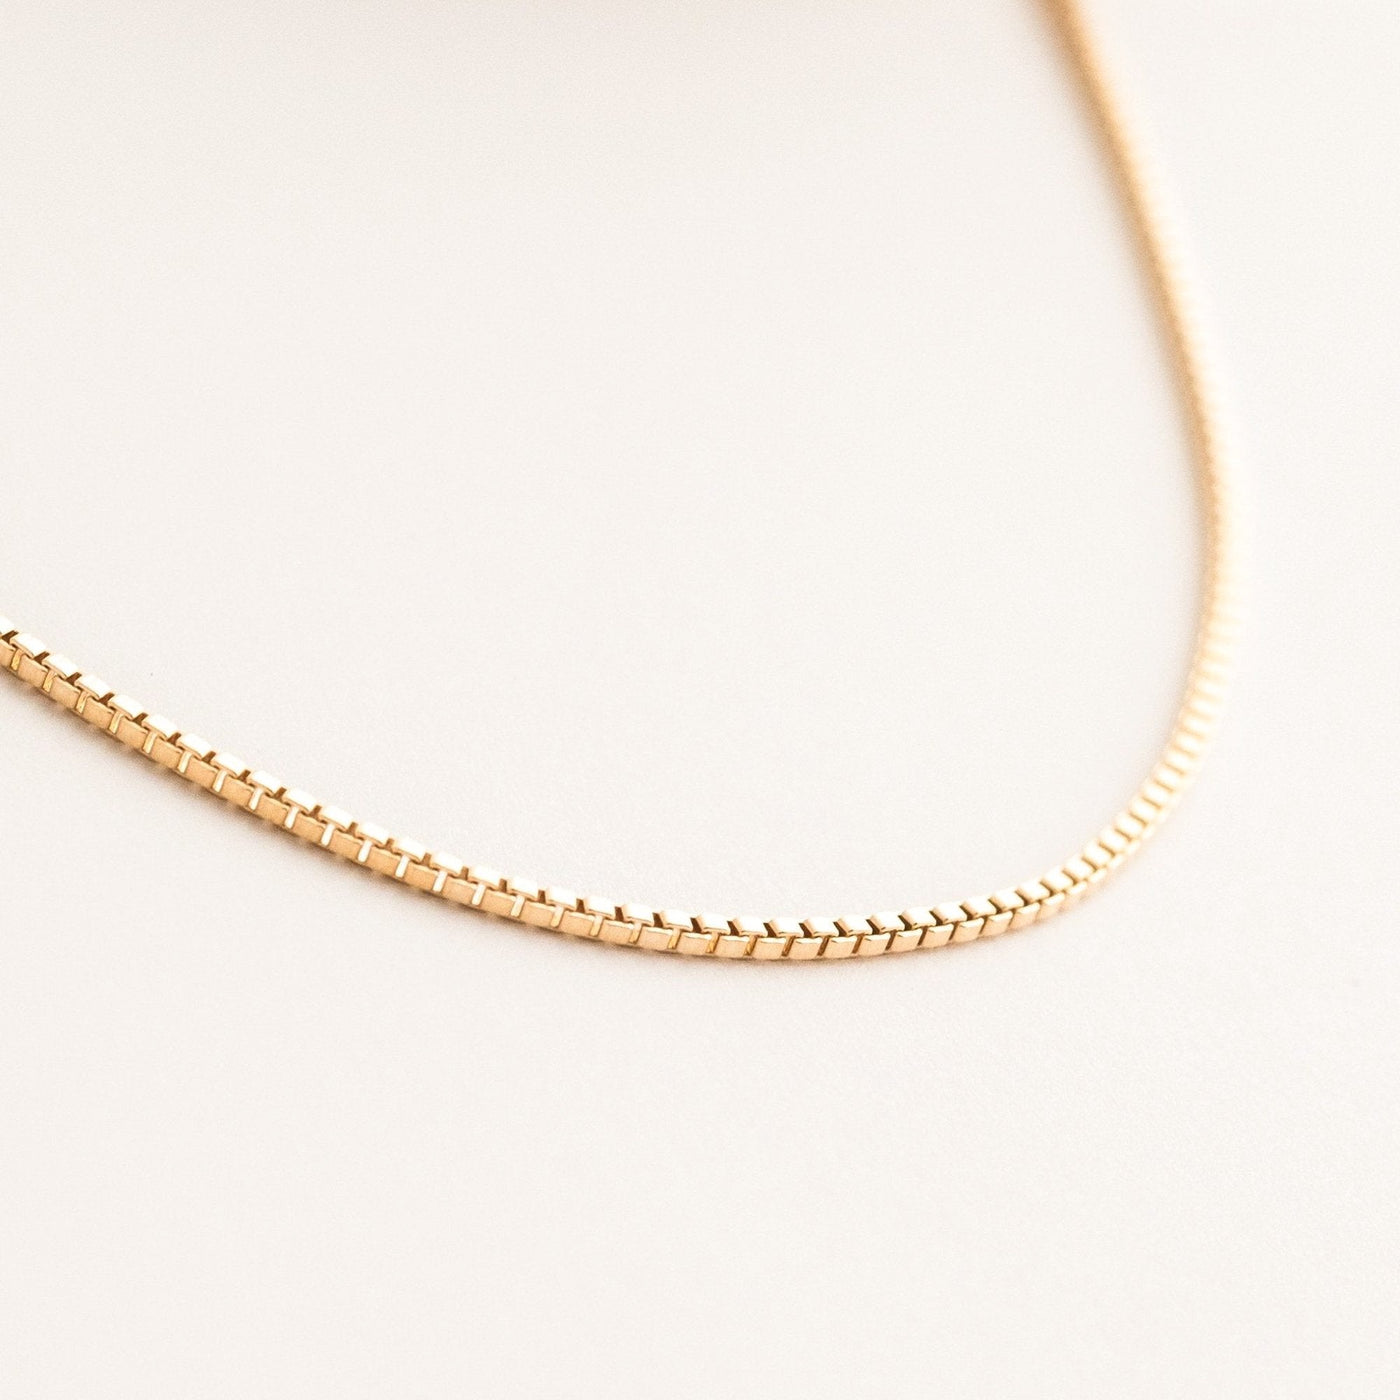 Box Chain Necklace by Simple & Dainty Jewelry